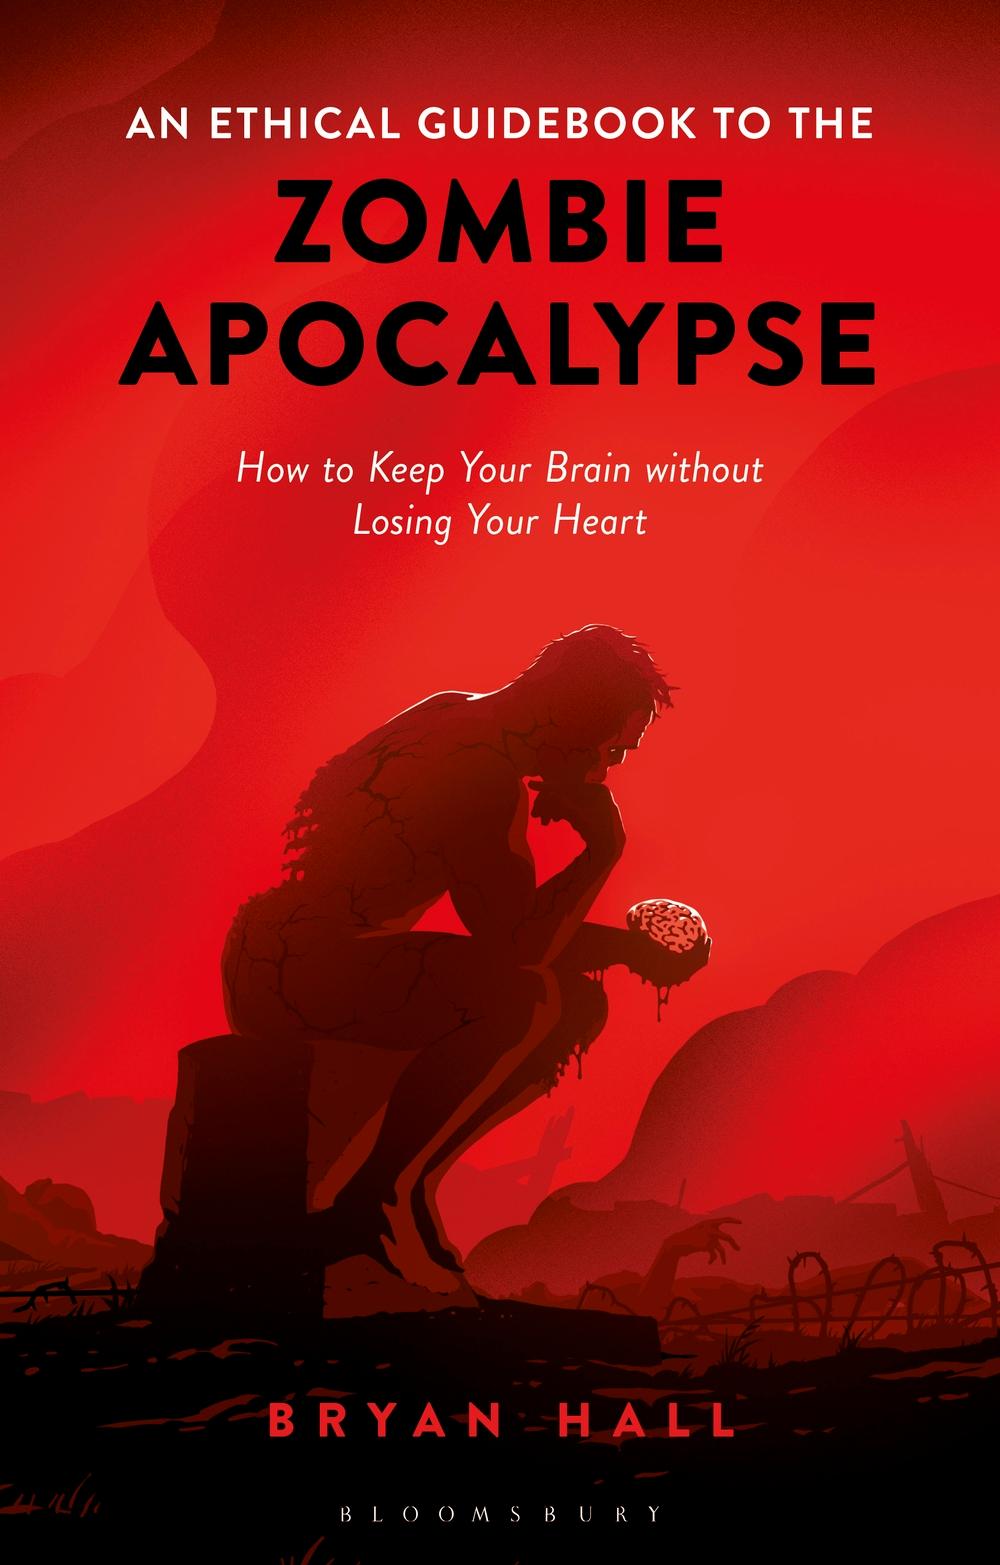 Ethical Guidebook to the Zombie Apocalypse - Bryan Hall